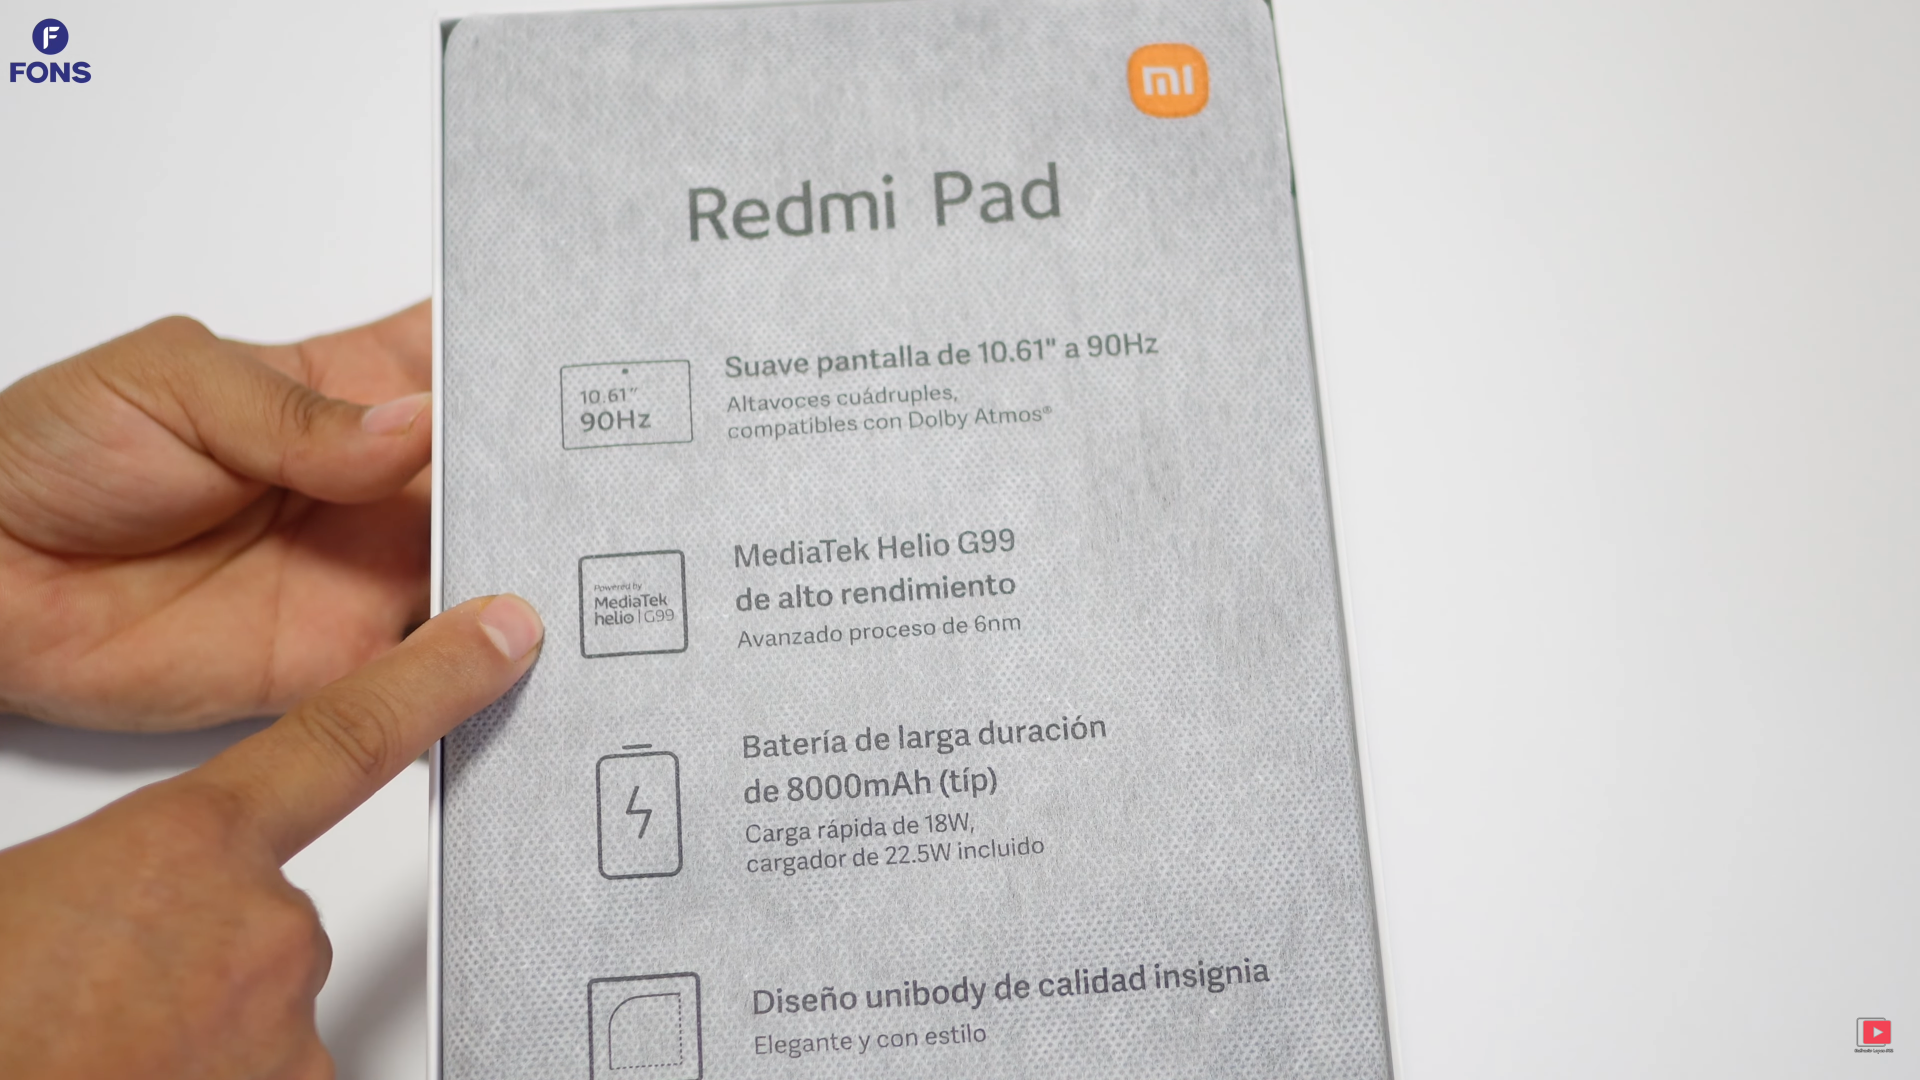 Redmi Pad shown in video before the announcement: tablet with 90 Hz screen,  MediaTek Helio G99 processor and 8000 mAh battery